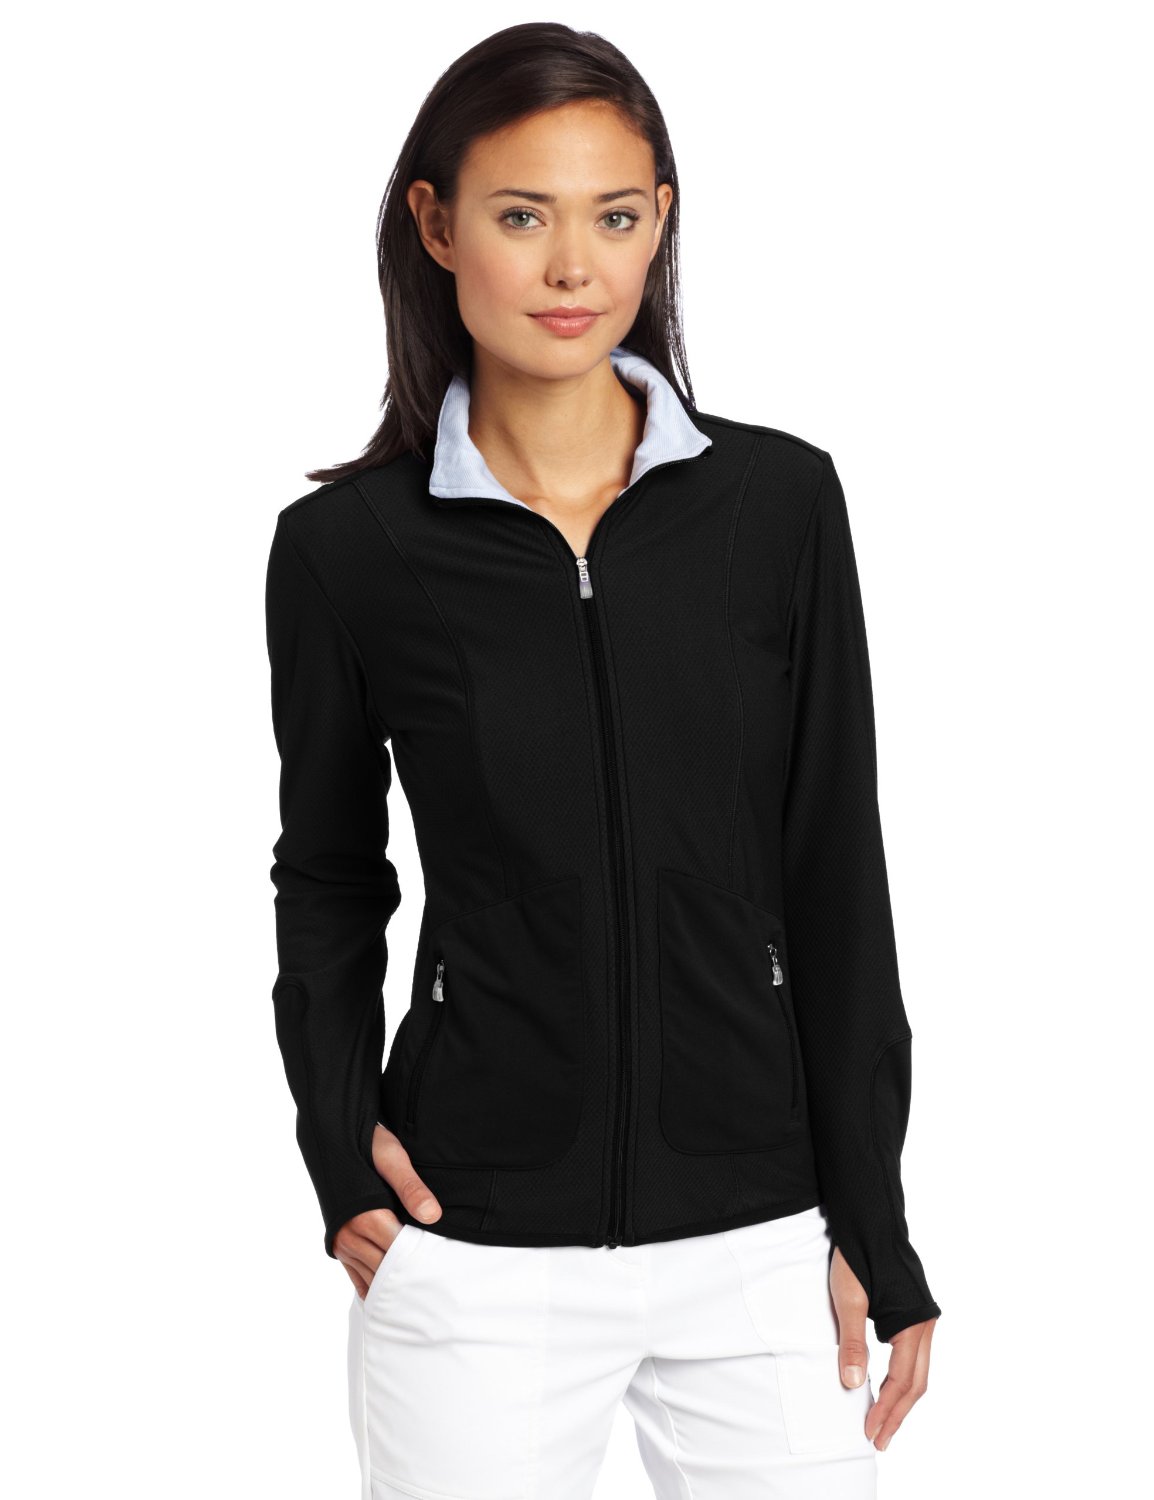 Womens Climalite Textured Knit Golf Jackets